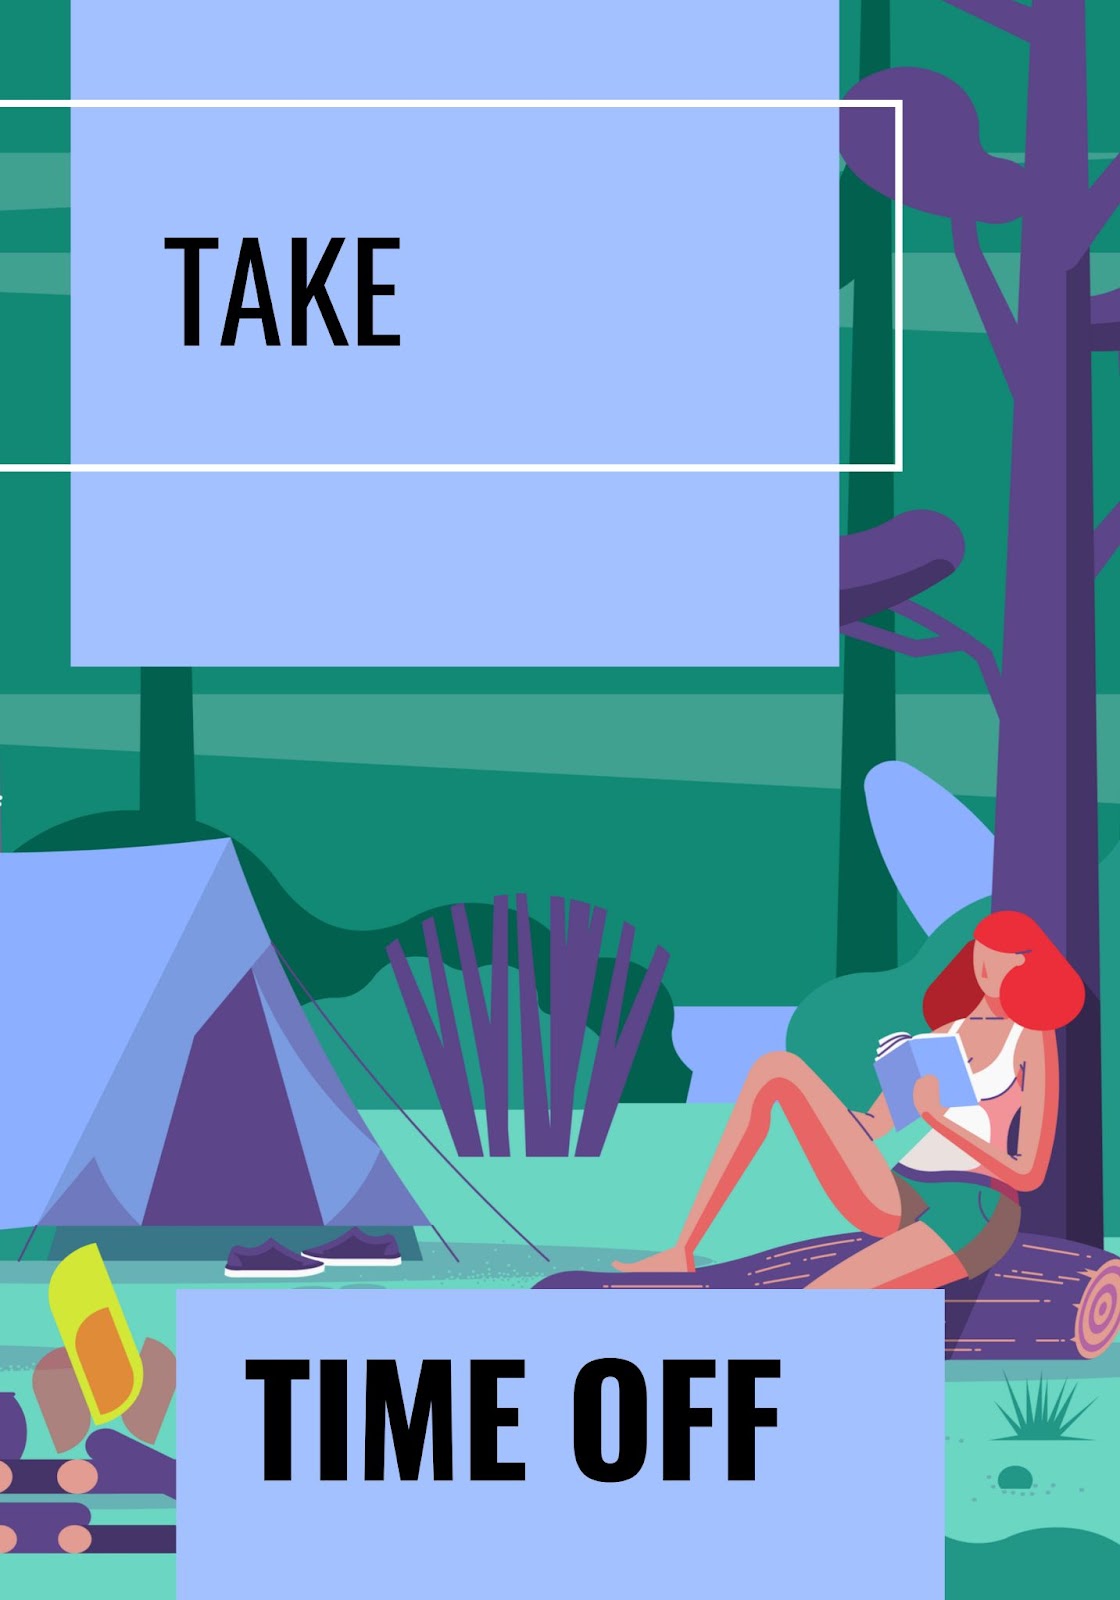 a graphic depiction of a person camping and reading a book under the tree 